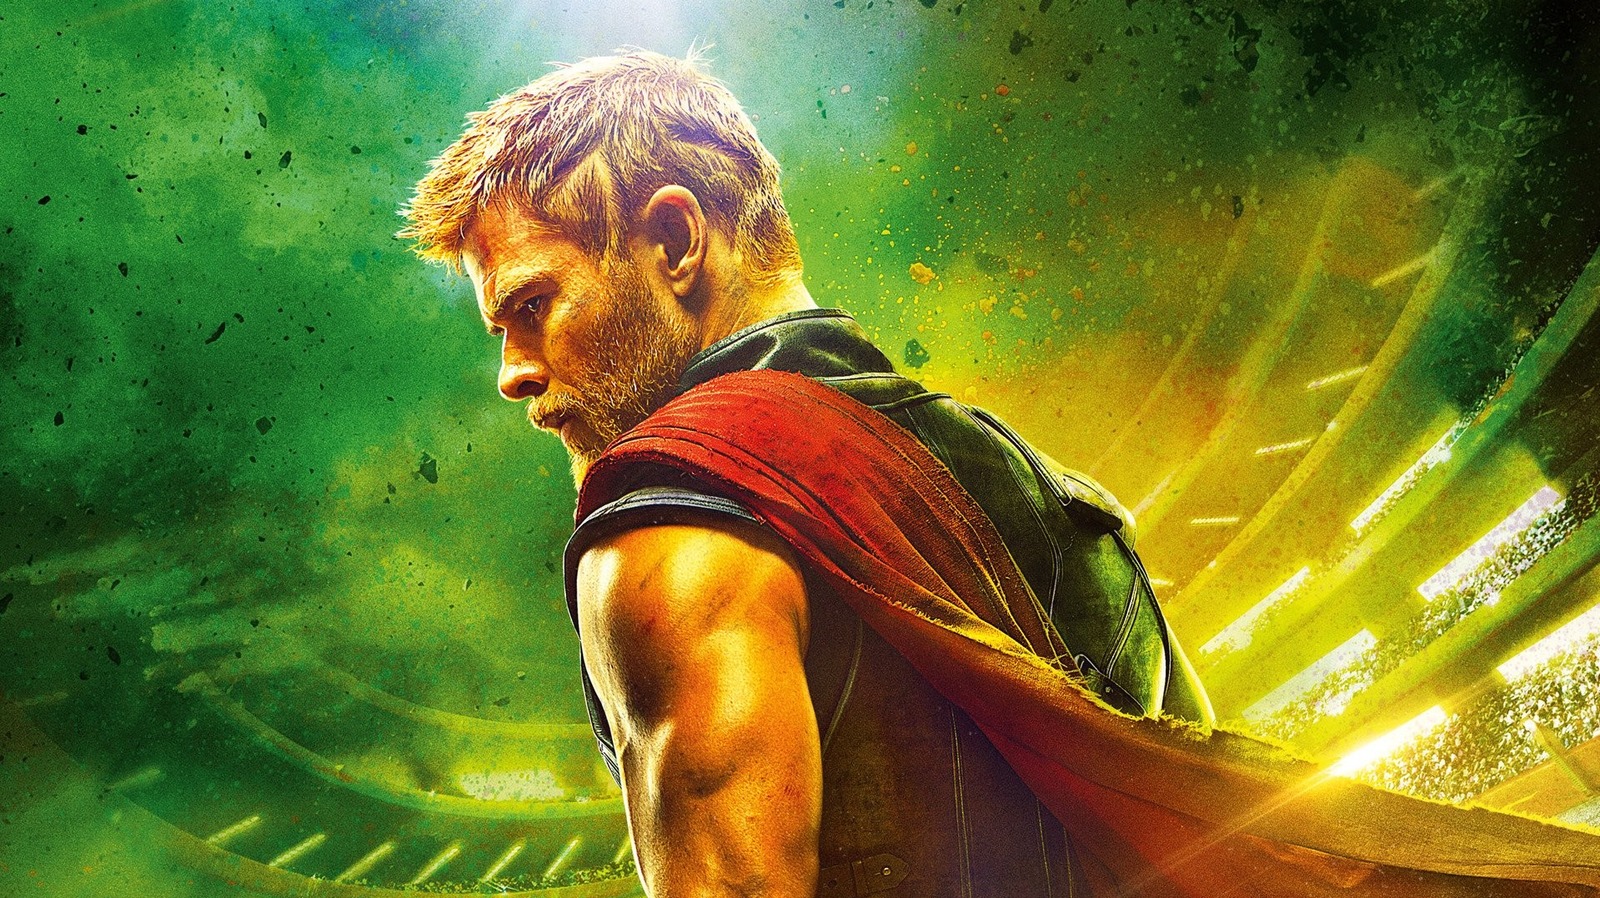 Chris Hemsworth Shows Off How Jacked He Is For The New Thor Film